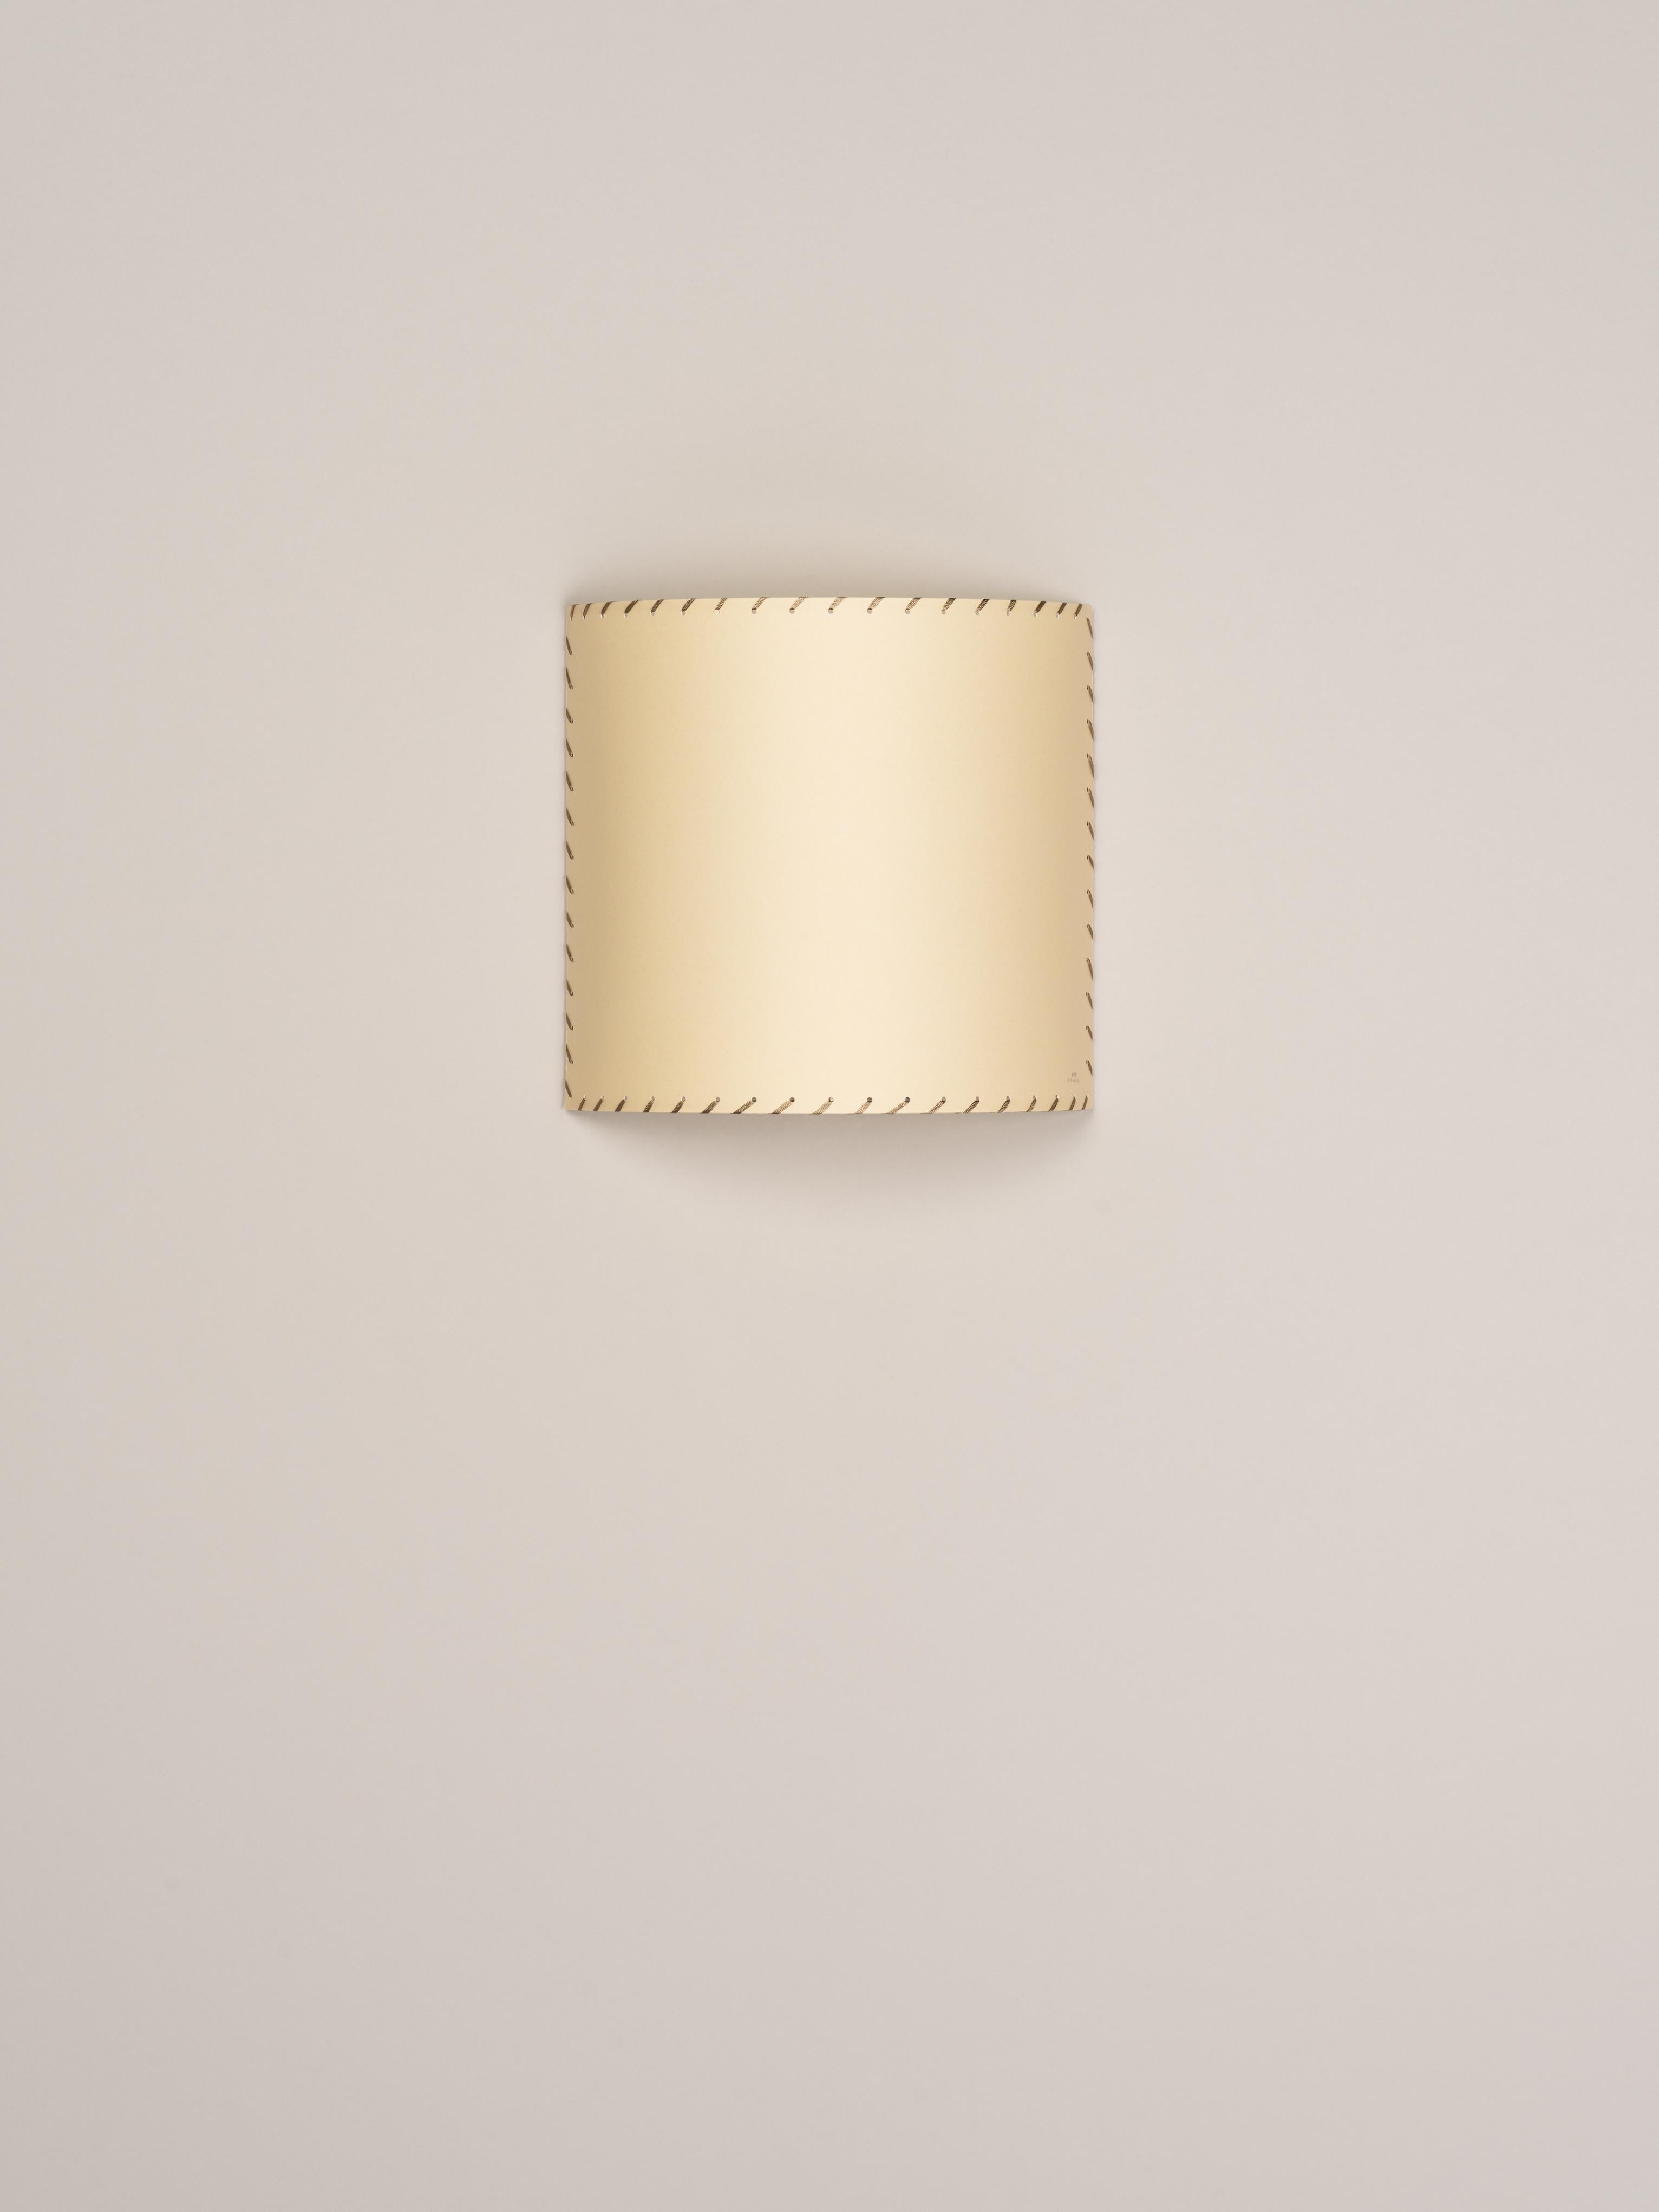 Beige Comodín Cuadrado wall lamp by Santa & Cole
Dimensions: D 31 x W 13 x H 30 cm
Materials: Metal, stitched parchment.

This minimalist wall lamp humanises neutral spaces with its colourful and functional sobriety. The shade is fondly